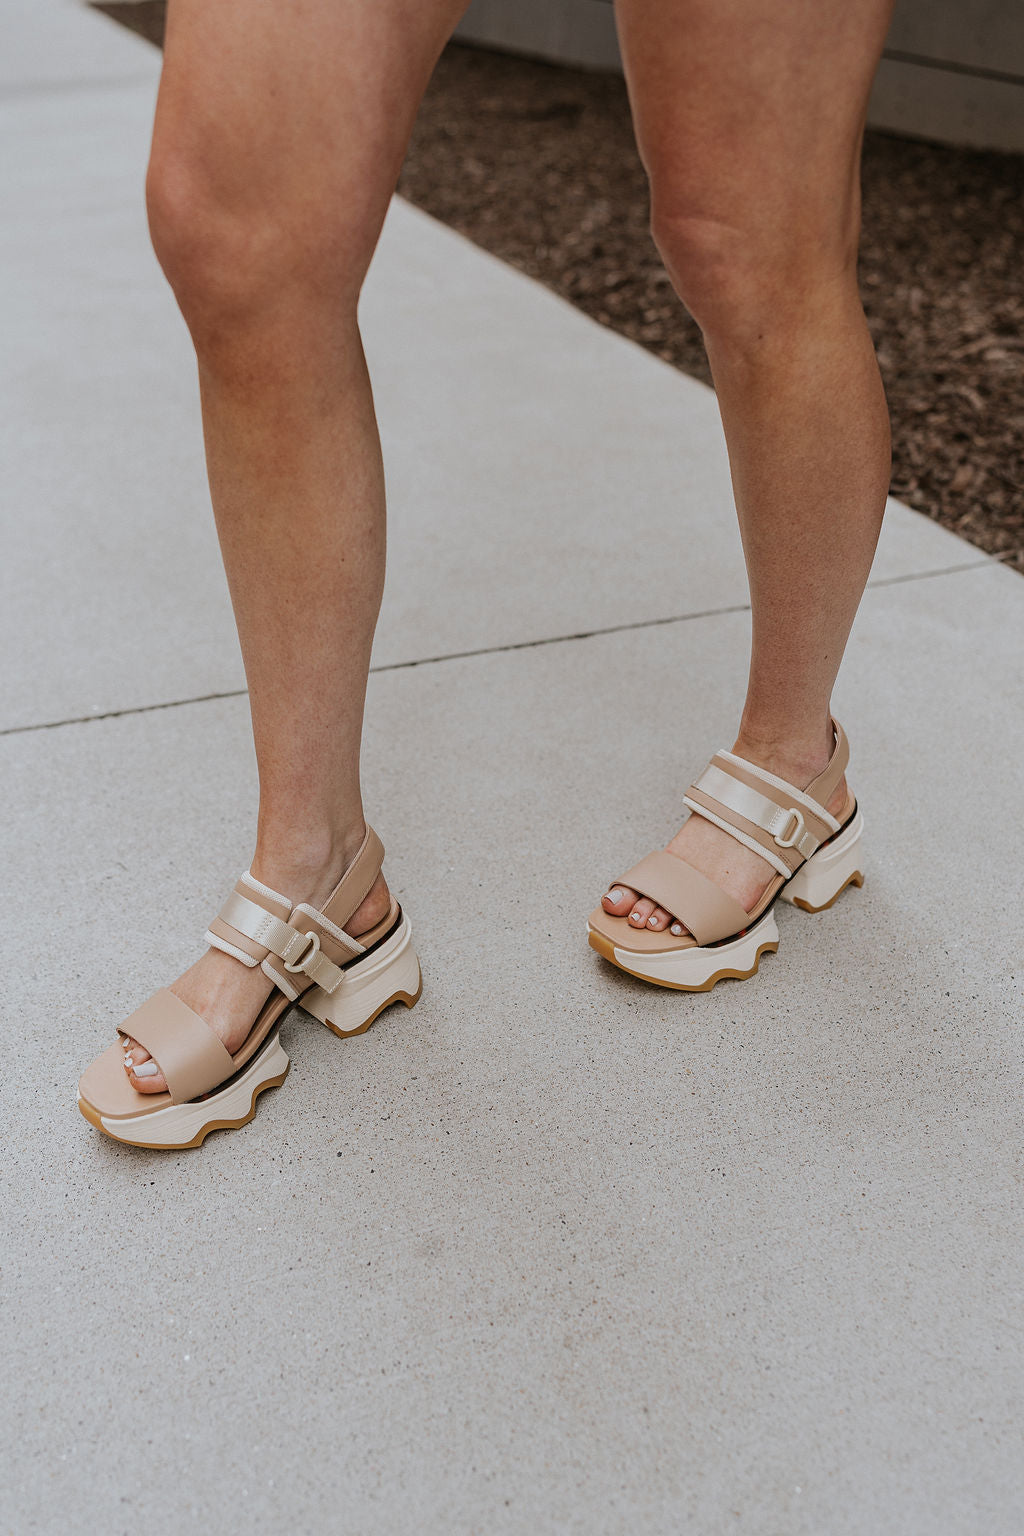 Side view of female model wearing the Kinetic Impact Slingback Heel in Honest Beige & Honest White which features Beige and Cream Leather Upper Fabric, Leather Strap, Adjustable Hook and Velcro Strap Closure, 1 1/2" Platform Sole, 2 1/12" Heel Height and Tortoise Sole Lining Details